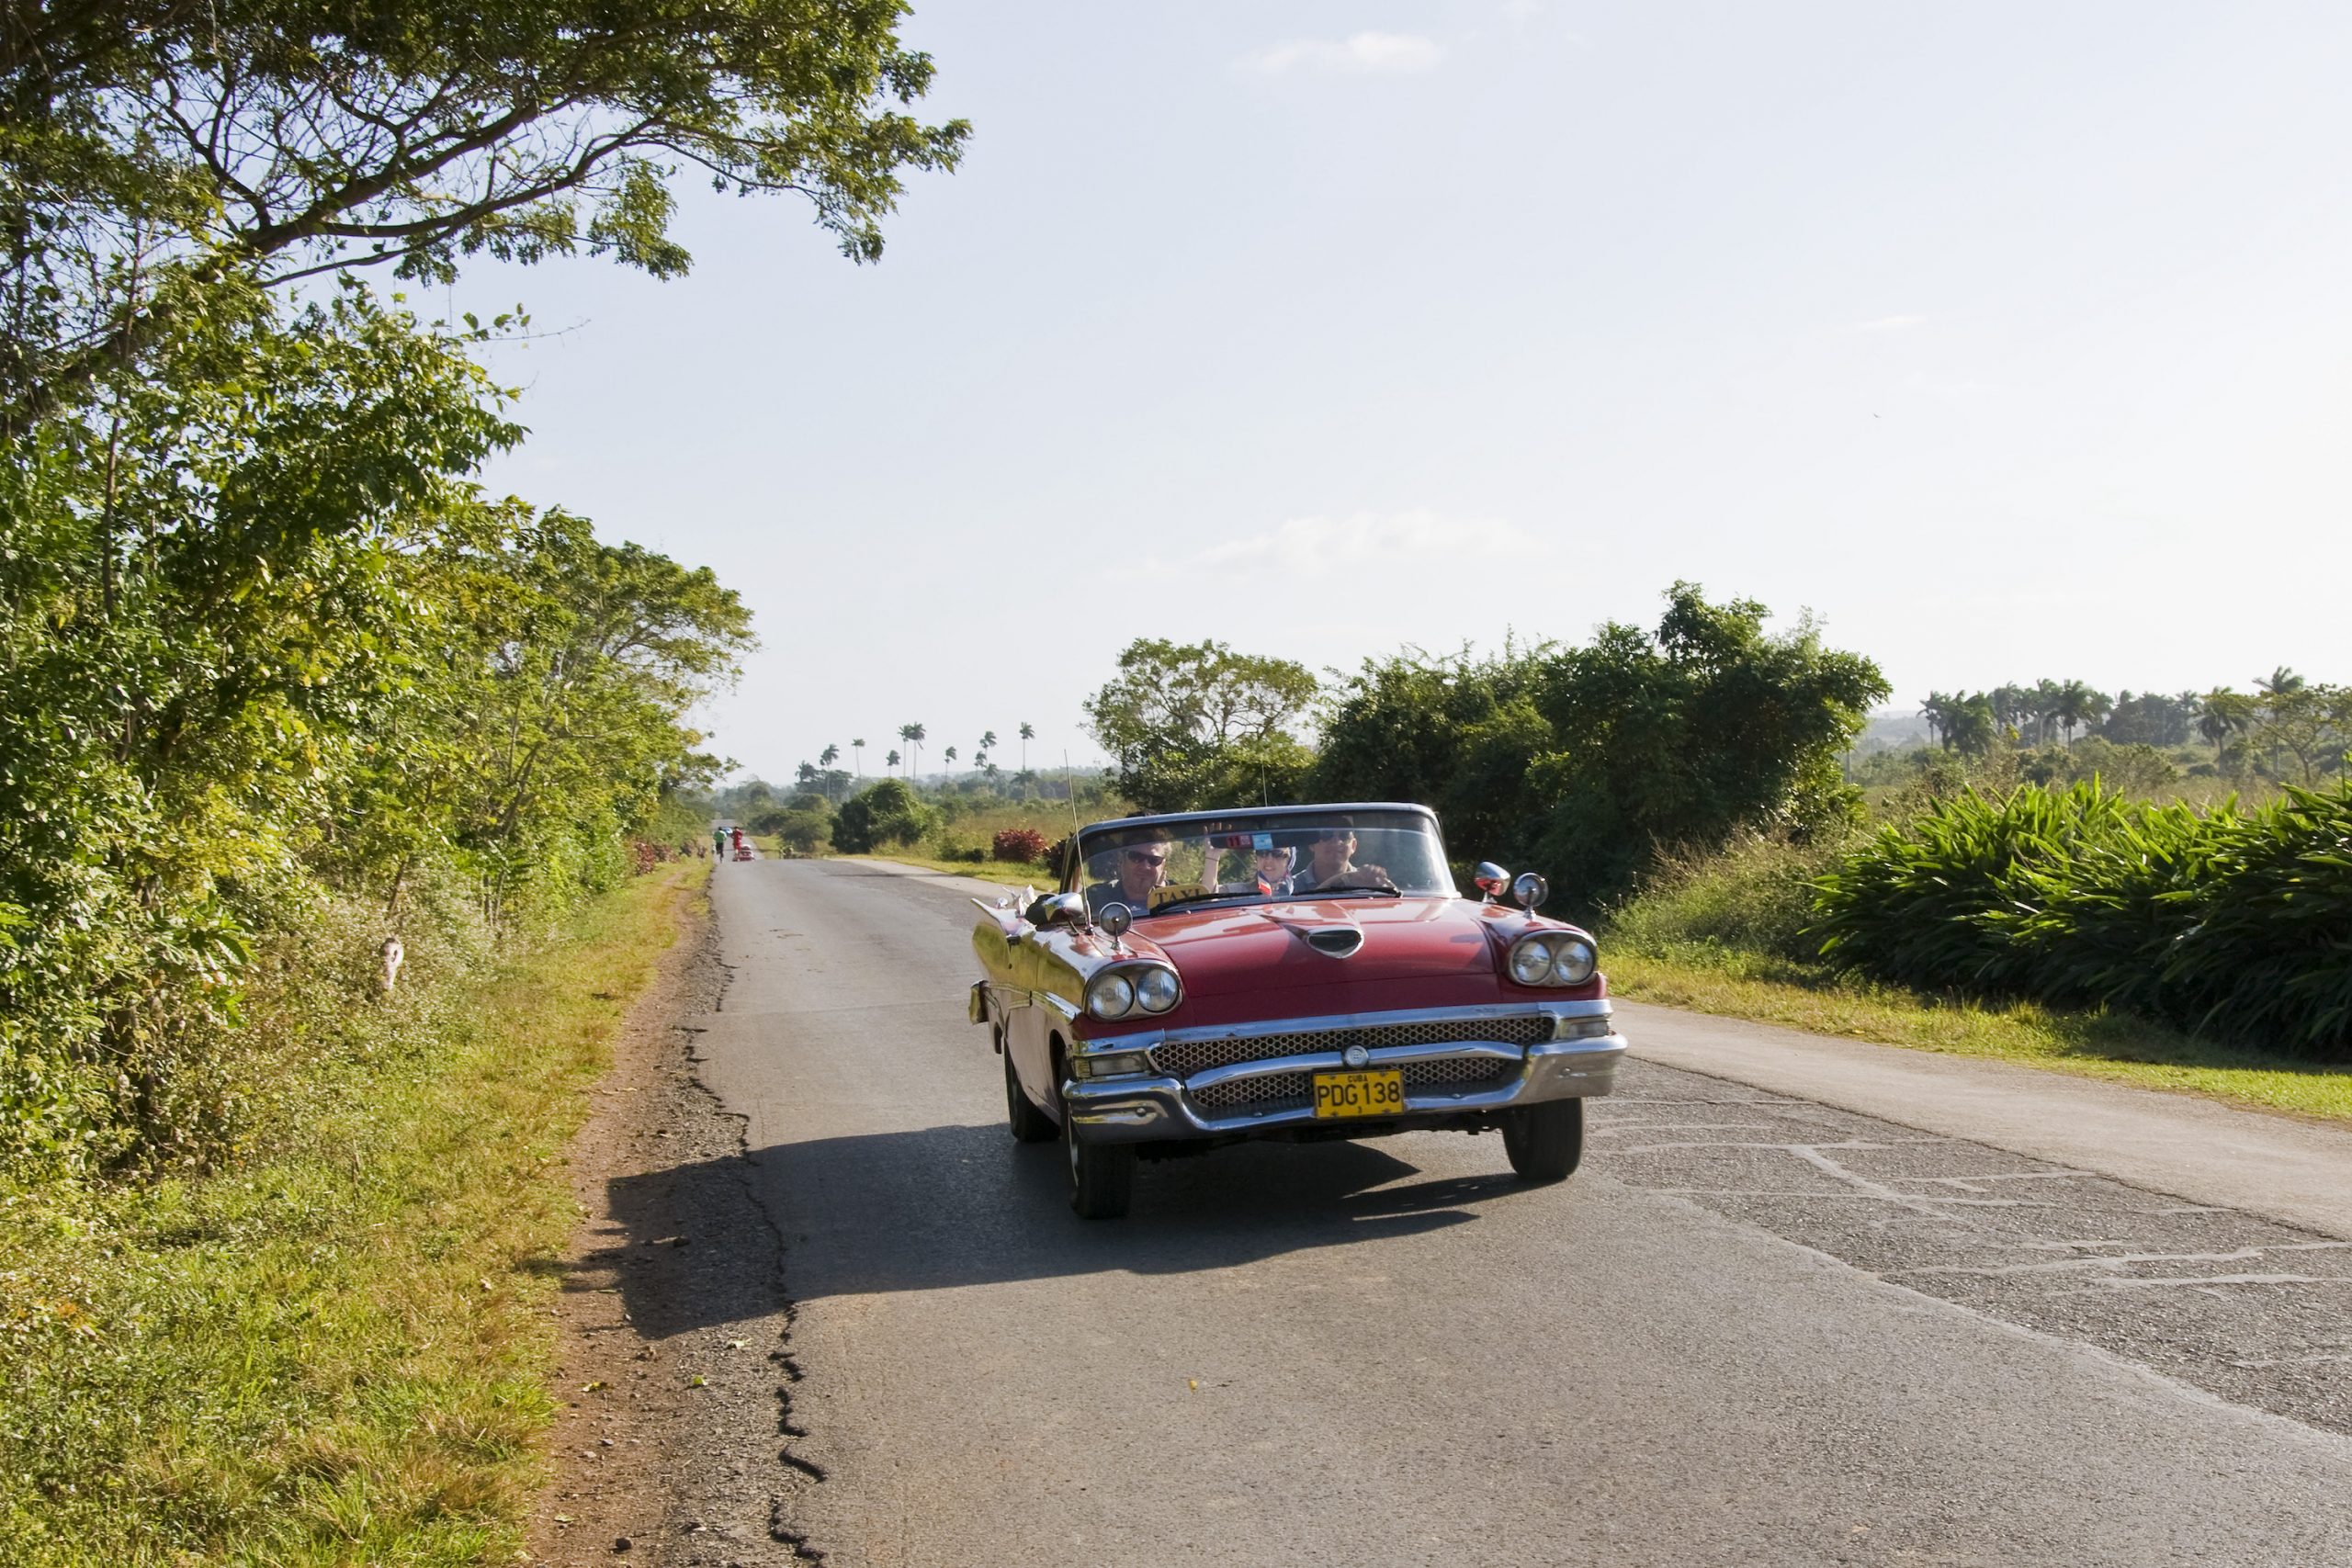 1958 Ford Fairlane, a beautiful classic car, driving down the road with the top down.